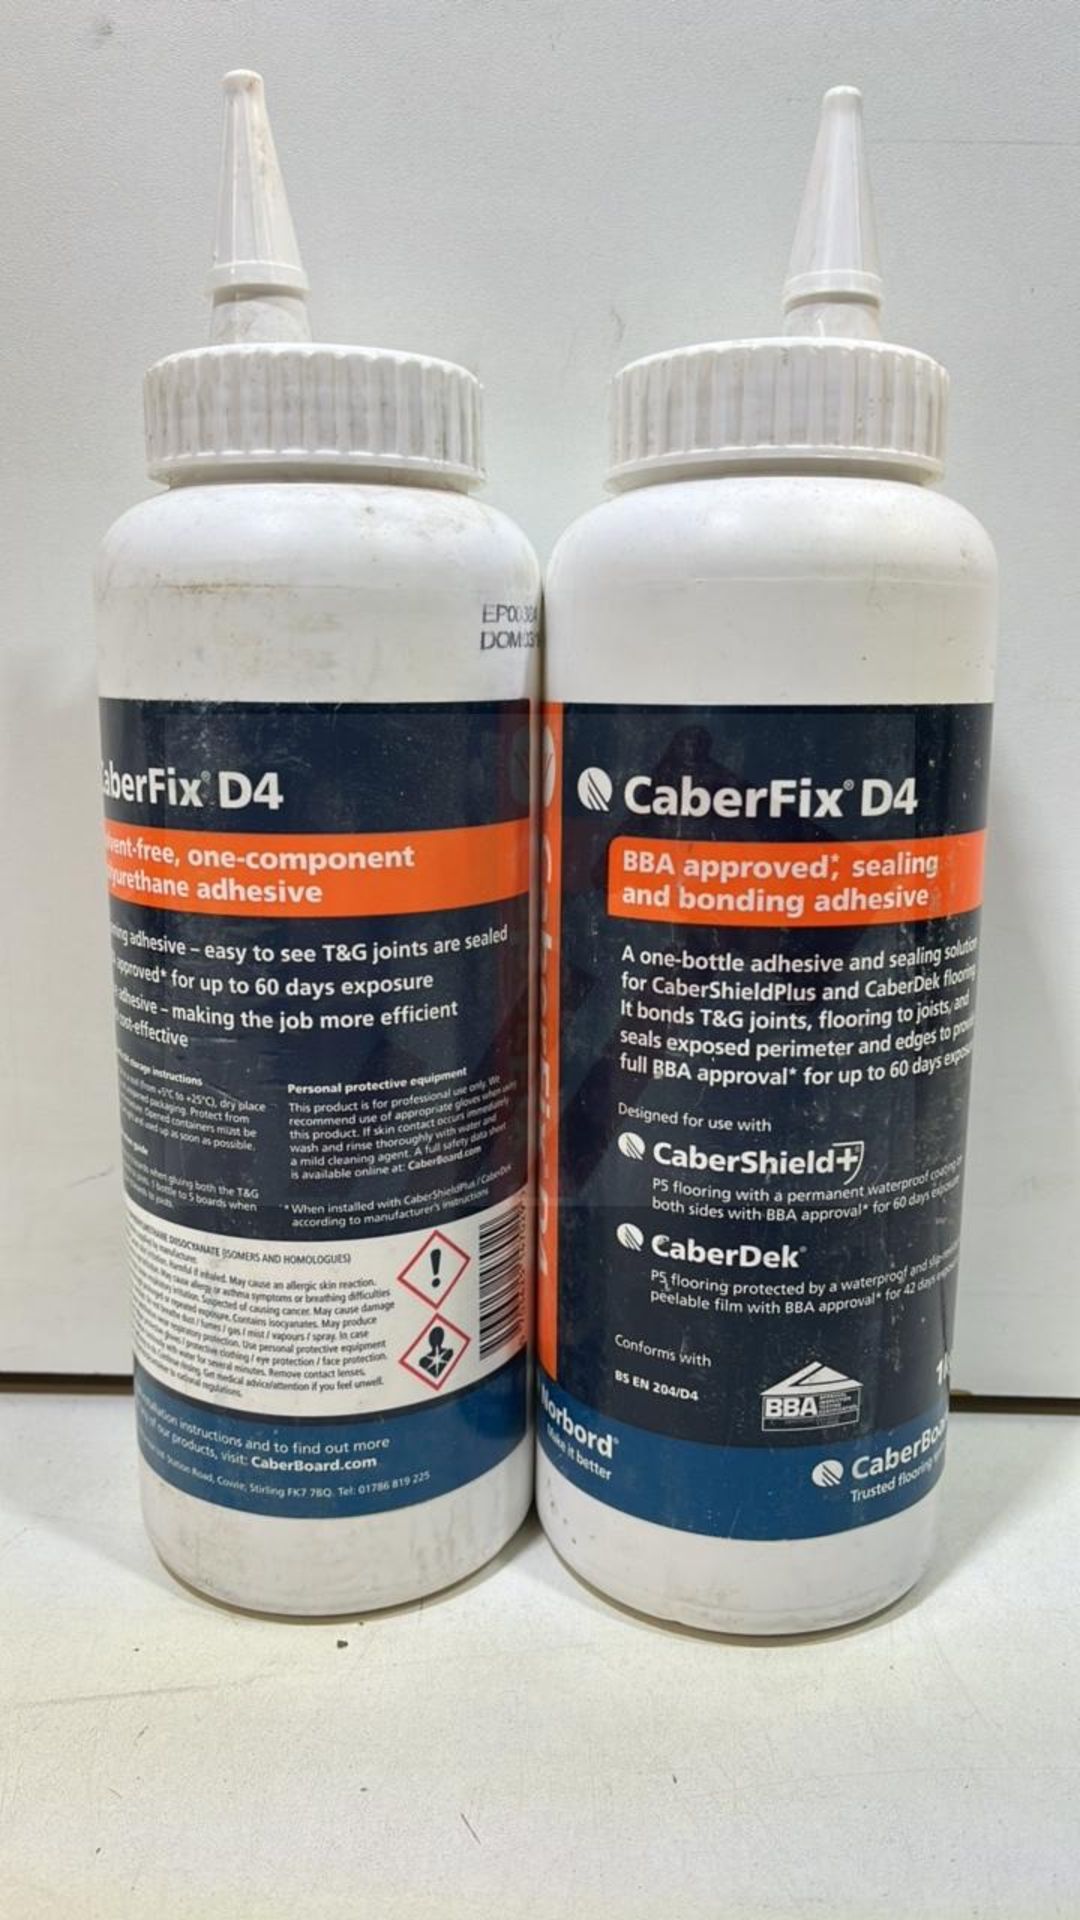 8 x 1KG Bottles Of Caber Fix D4 Sealing And Bonding Adhesive - Image 2 of 2